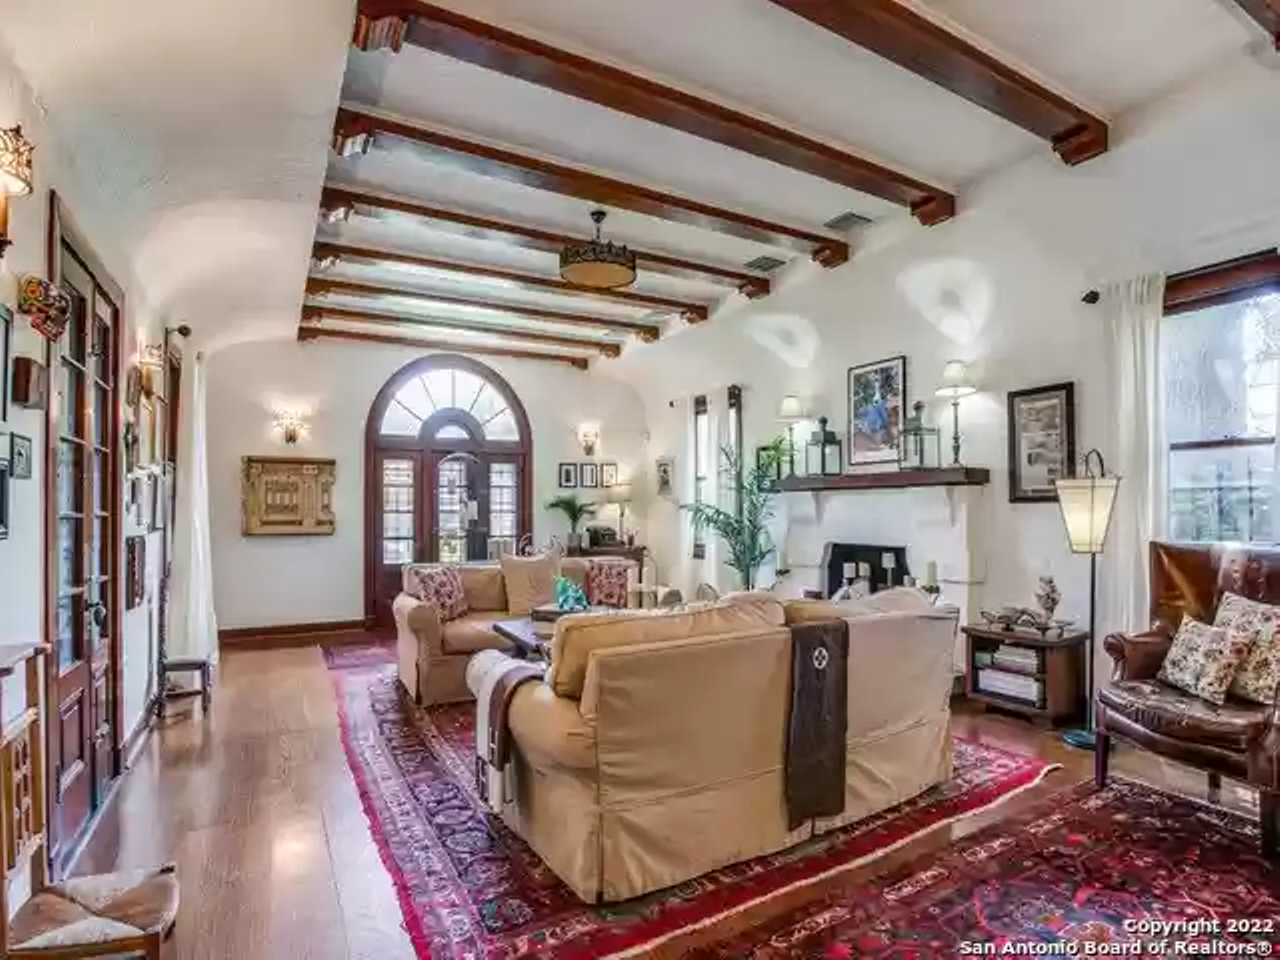 This historic Spanish-style near Woodlawn Lake has a domed mural and a spiral staircase